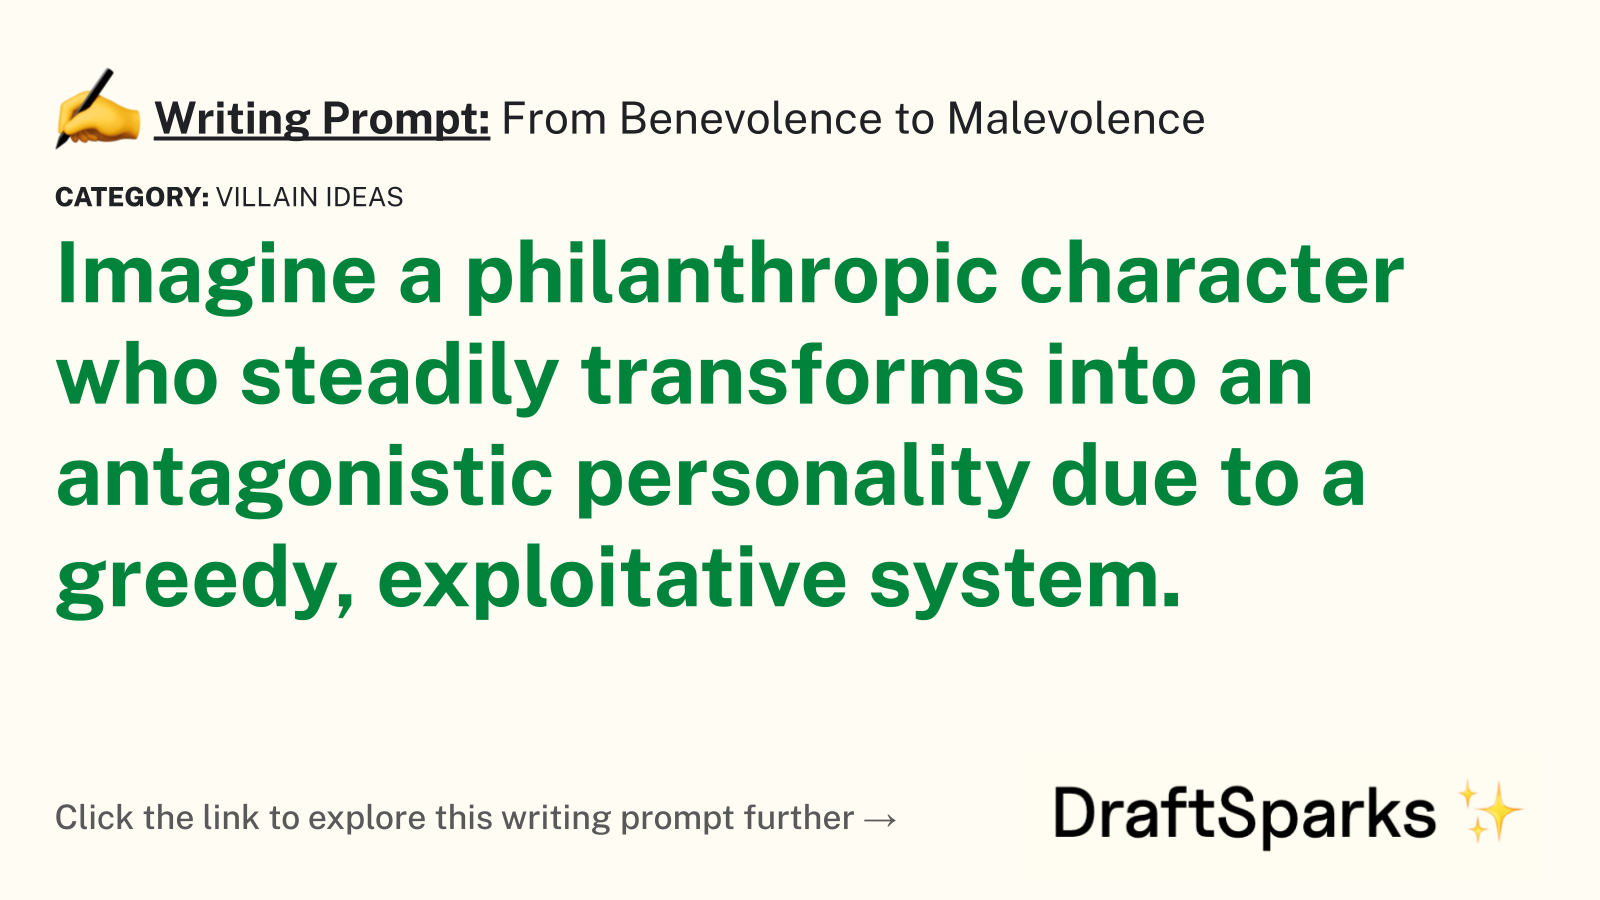 From Benevolence to Malevolence